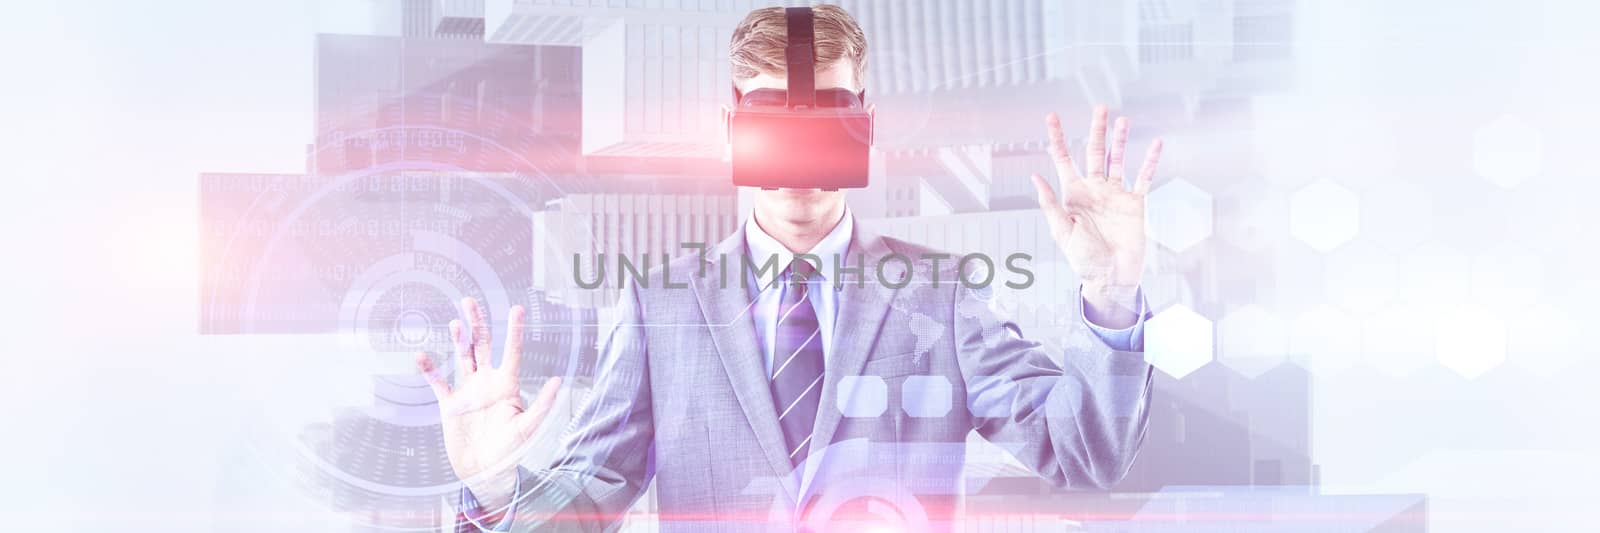 Composite image of businessman using virtual reality headset by Wavebreakmedia